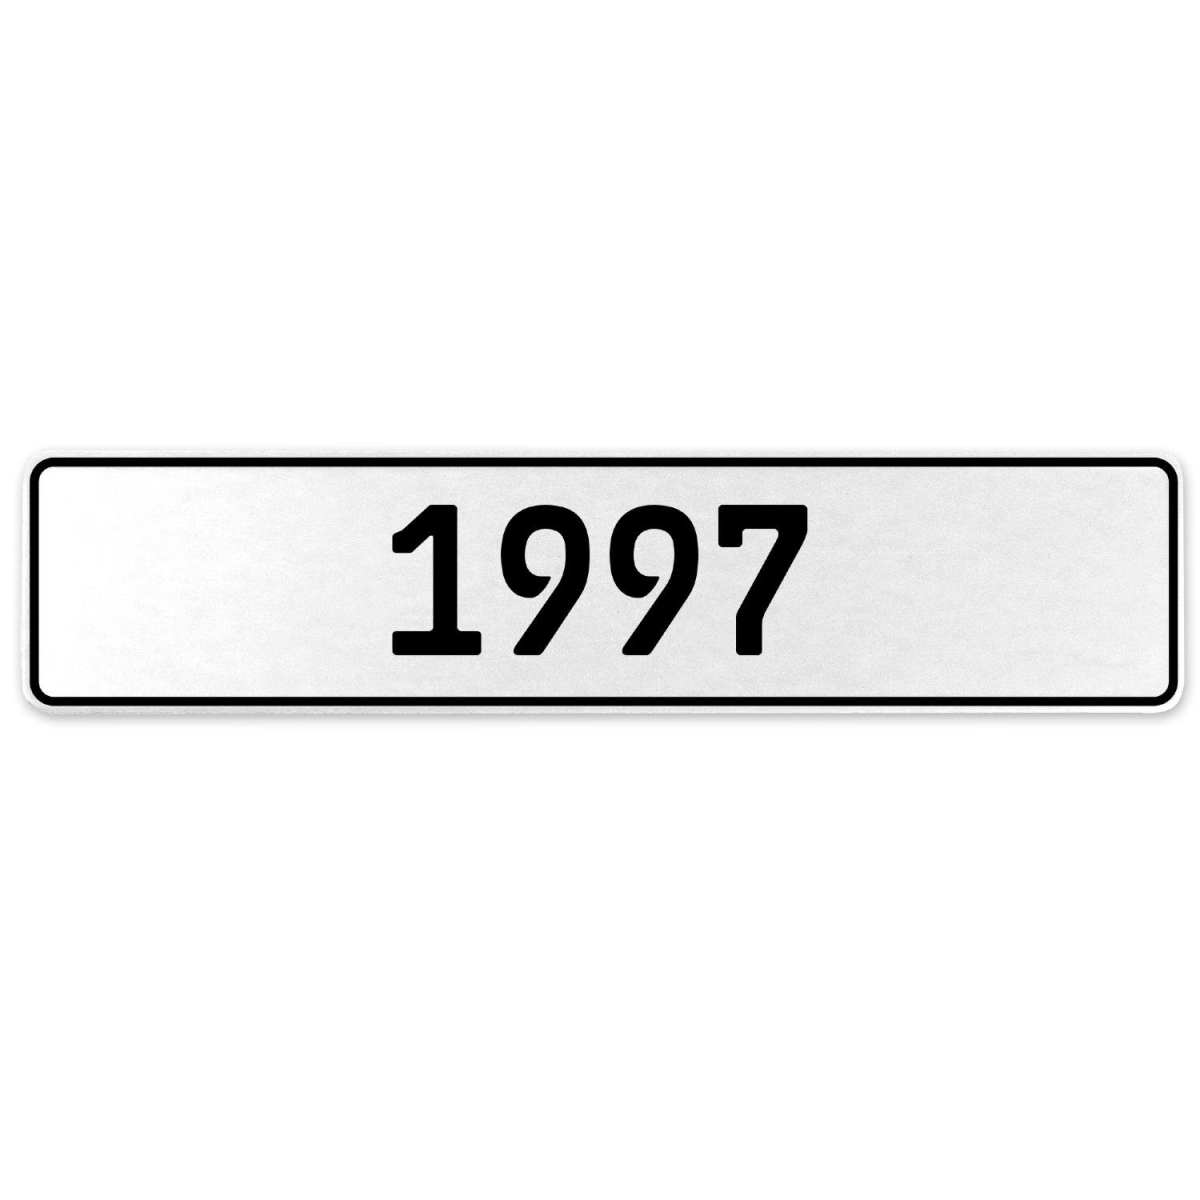 553240 1997 Year - White Aluminum Street Sign Mancave Euro Plate Name Door Sign Wall